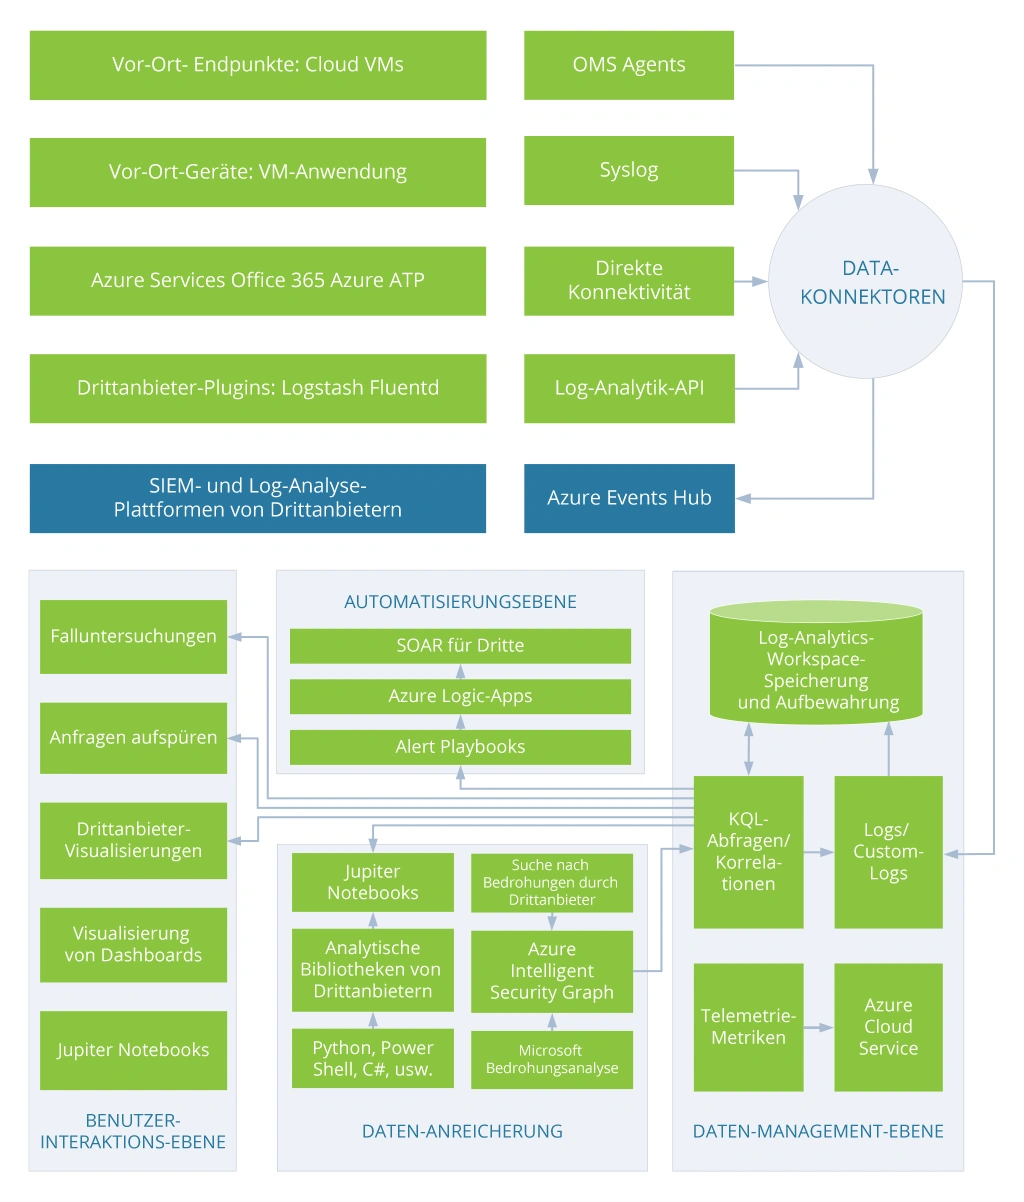 Assessing Azure Sentinel Capabilities for a Major Agricultural Company - case study scheme